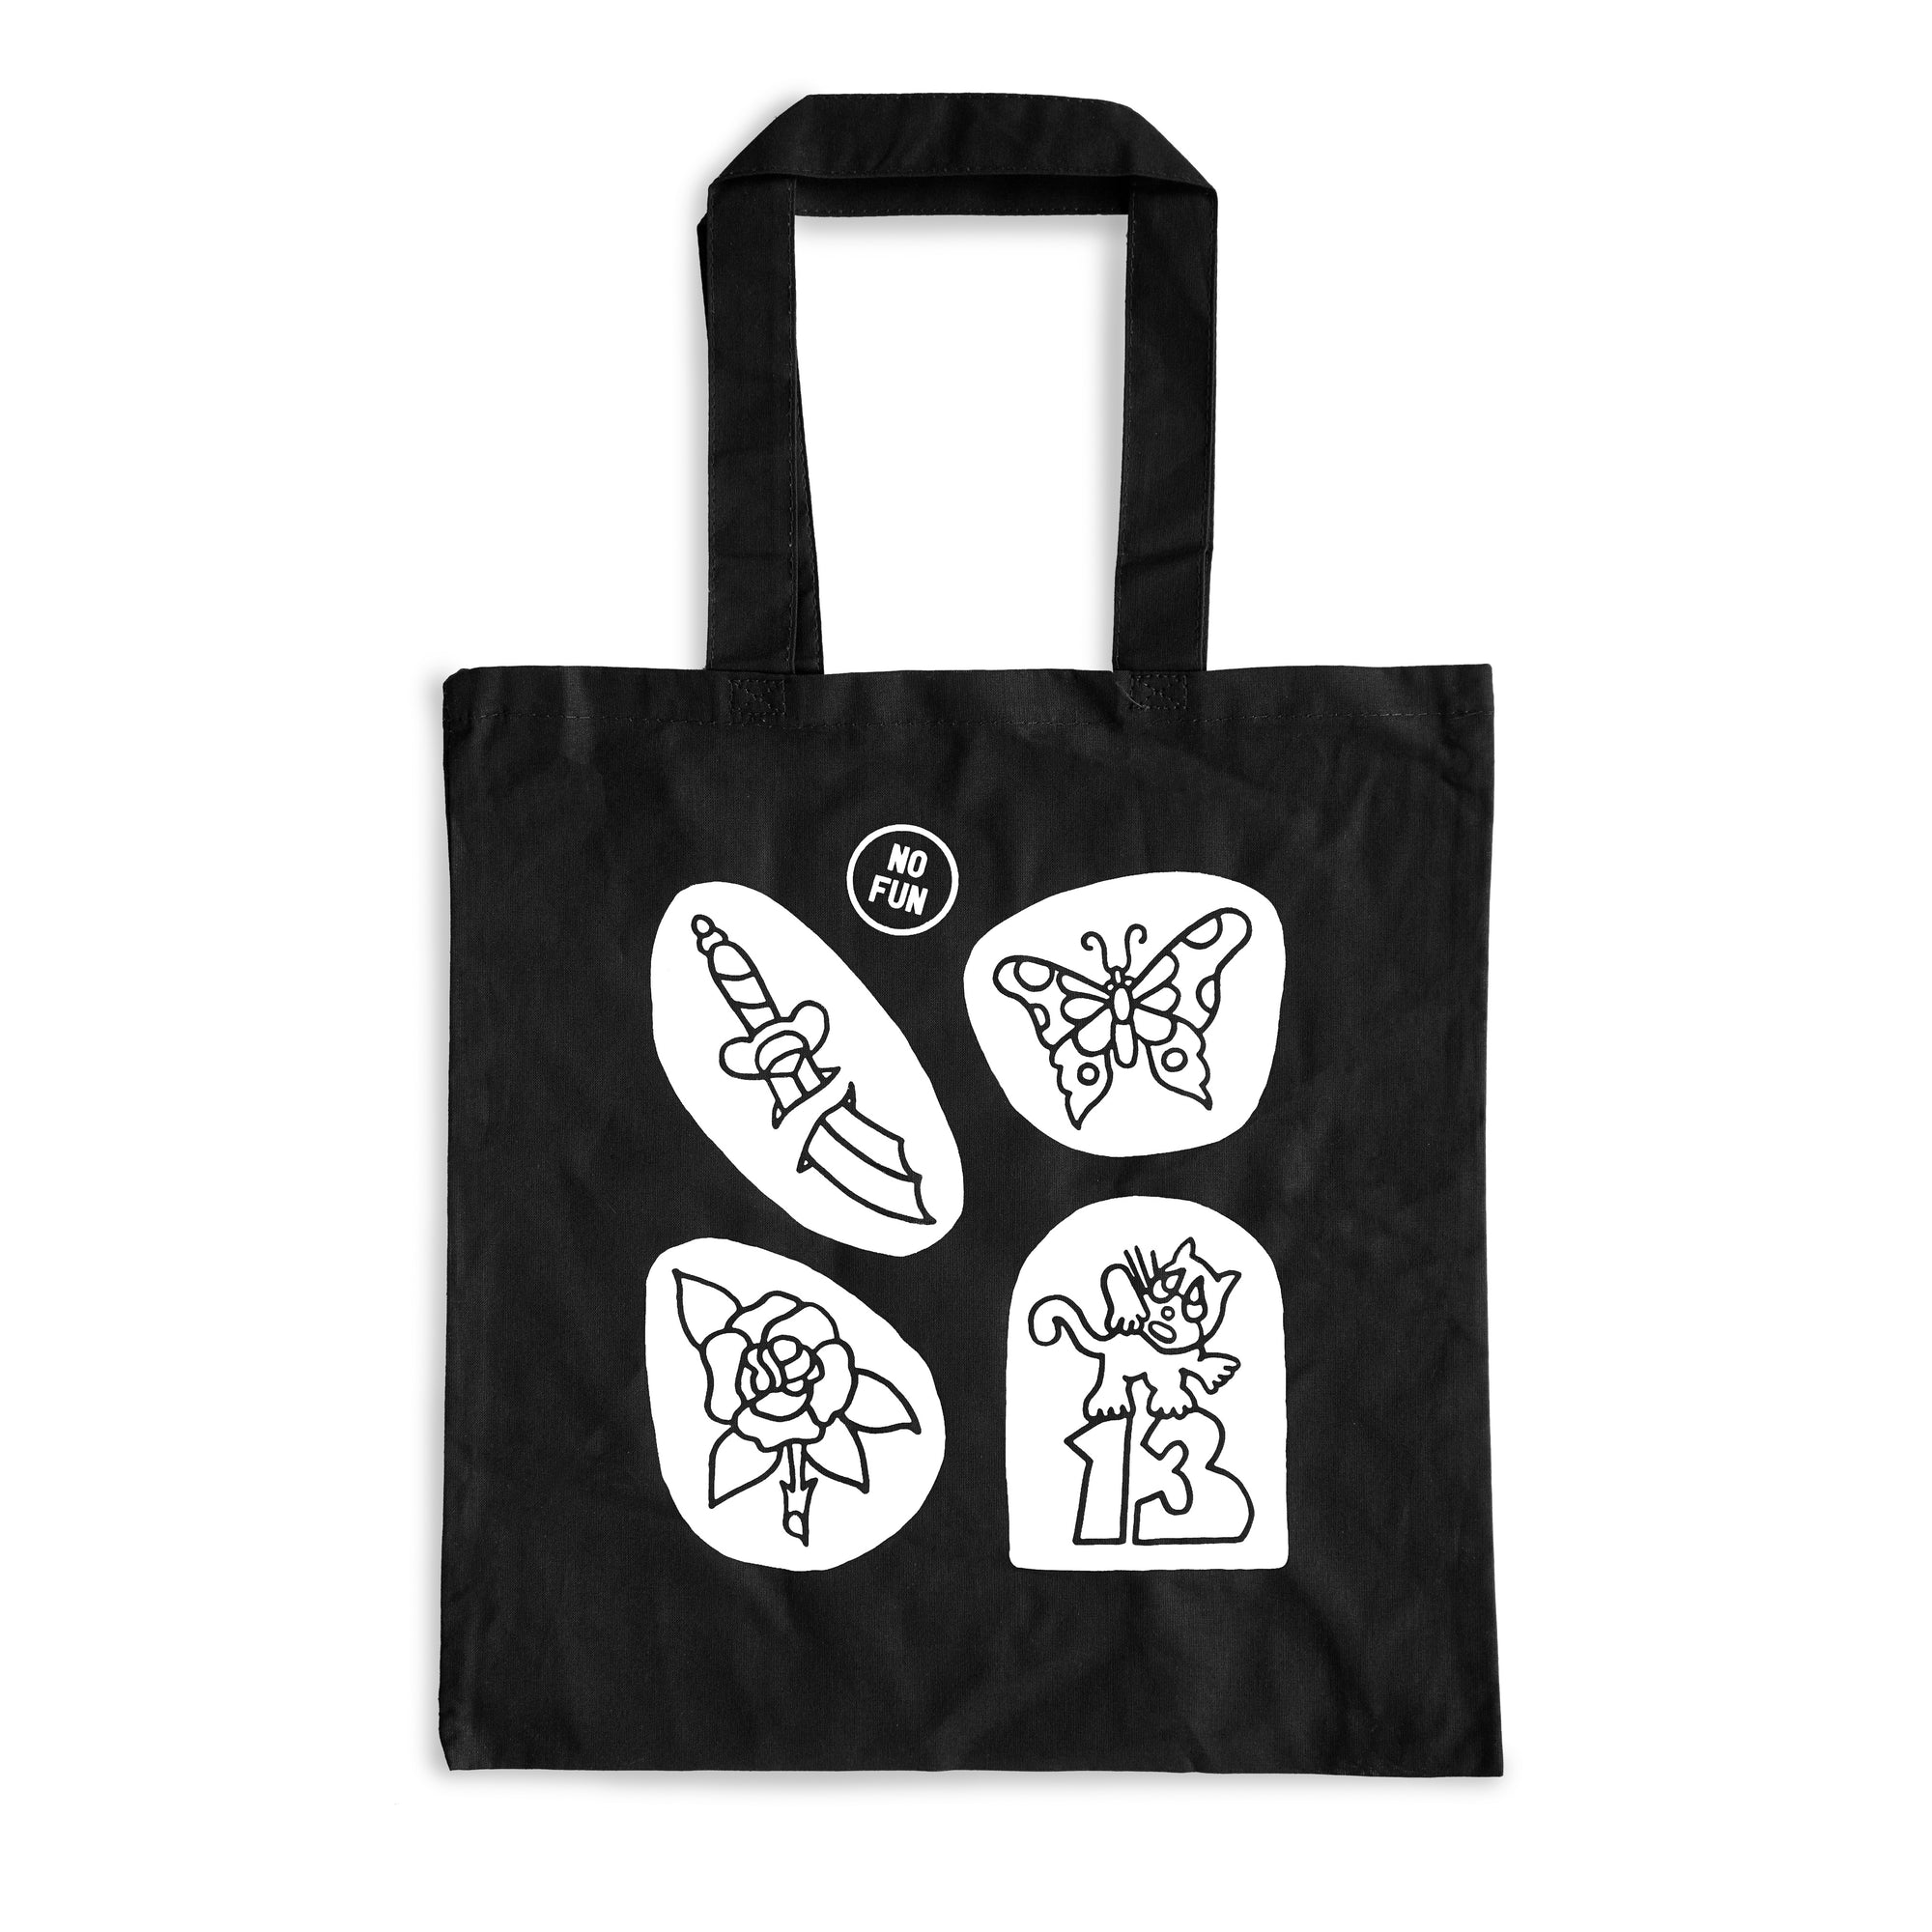 Photo of the No Fun® "Flash Sheet" Tote bag.  The bag is black with a white graphic, and photographed against a whit ebackground.  The design on the bag is four images that include: a 2 part dagger, a butterfly, a rose, and a cat atop a number "13".  There is also a small "No Fun®" logo near the top above the other designs.  The graphic has been inspired by traditional tattoo flash sheet artwork.